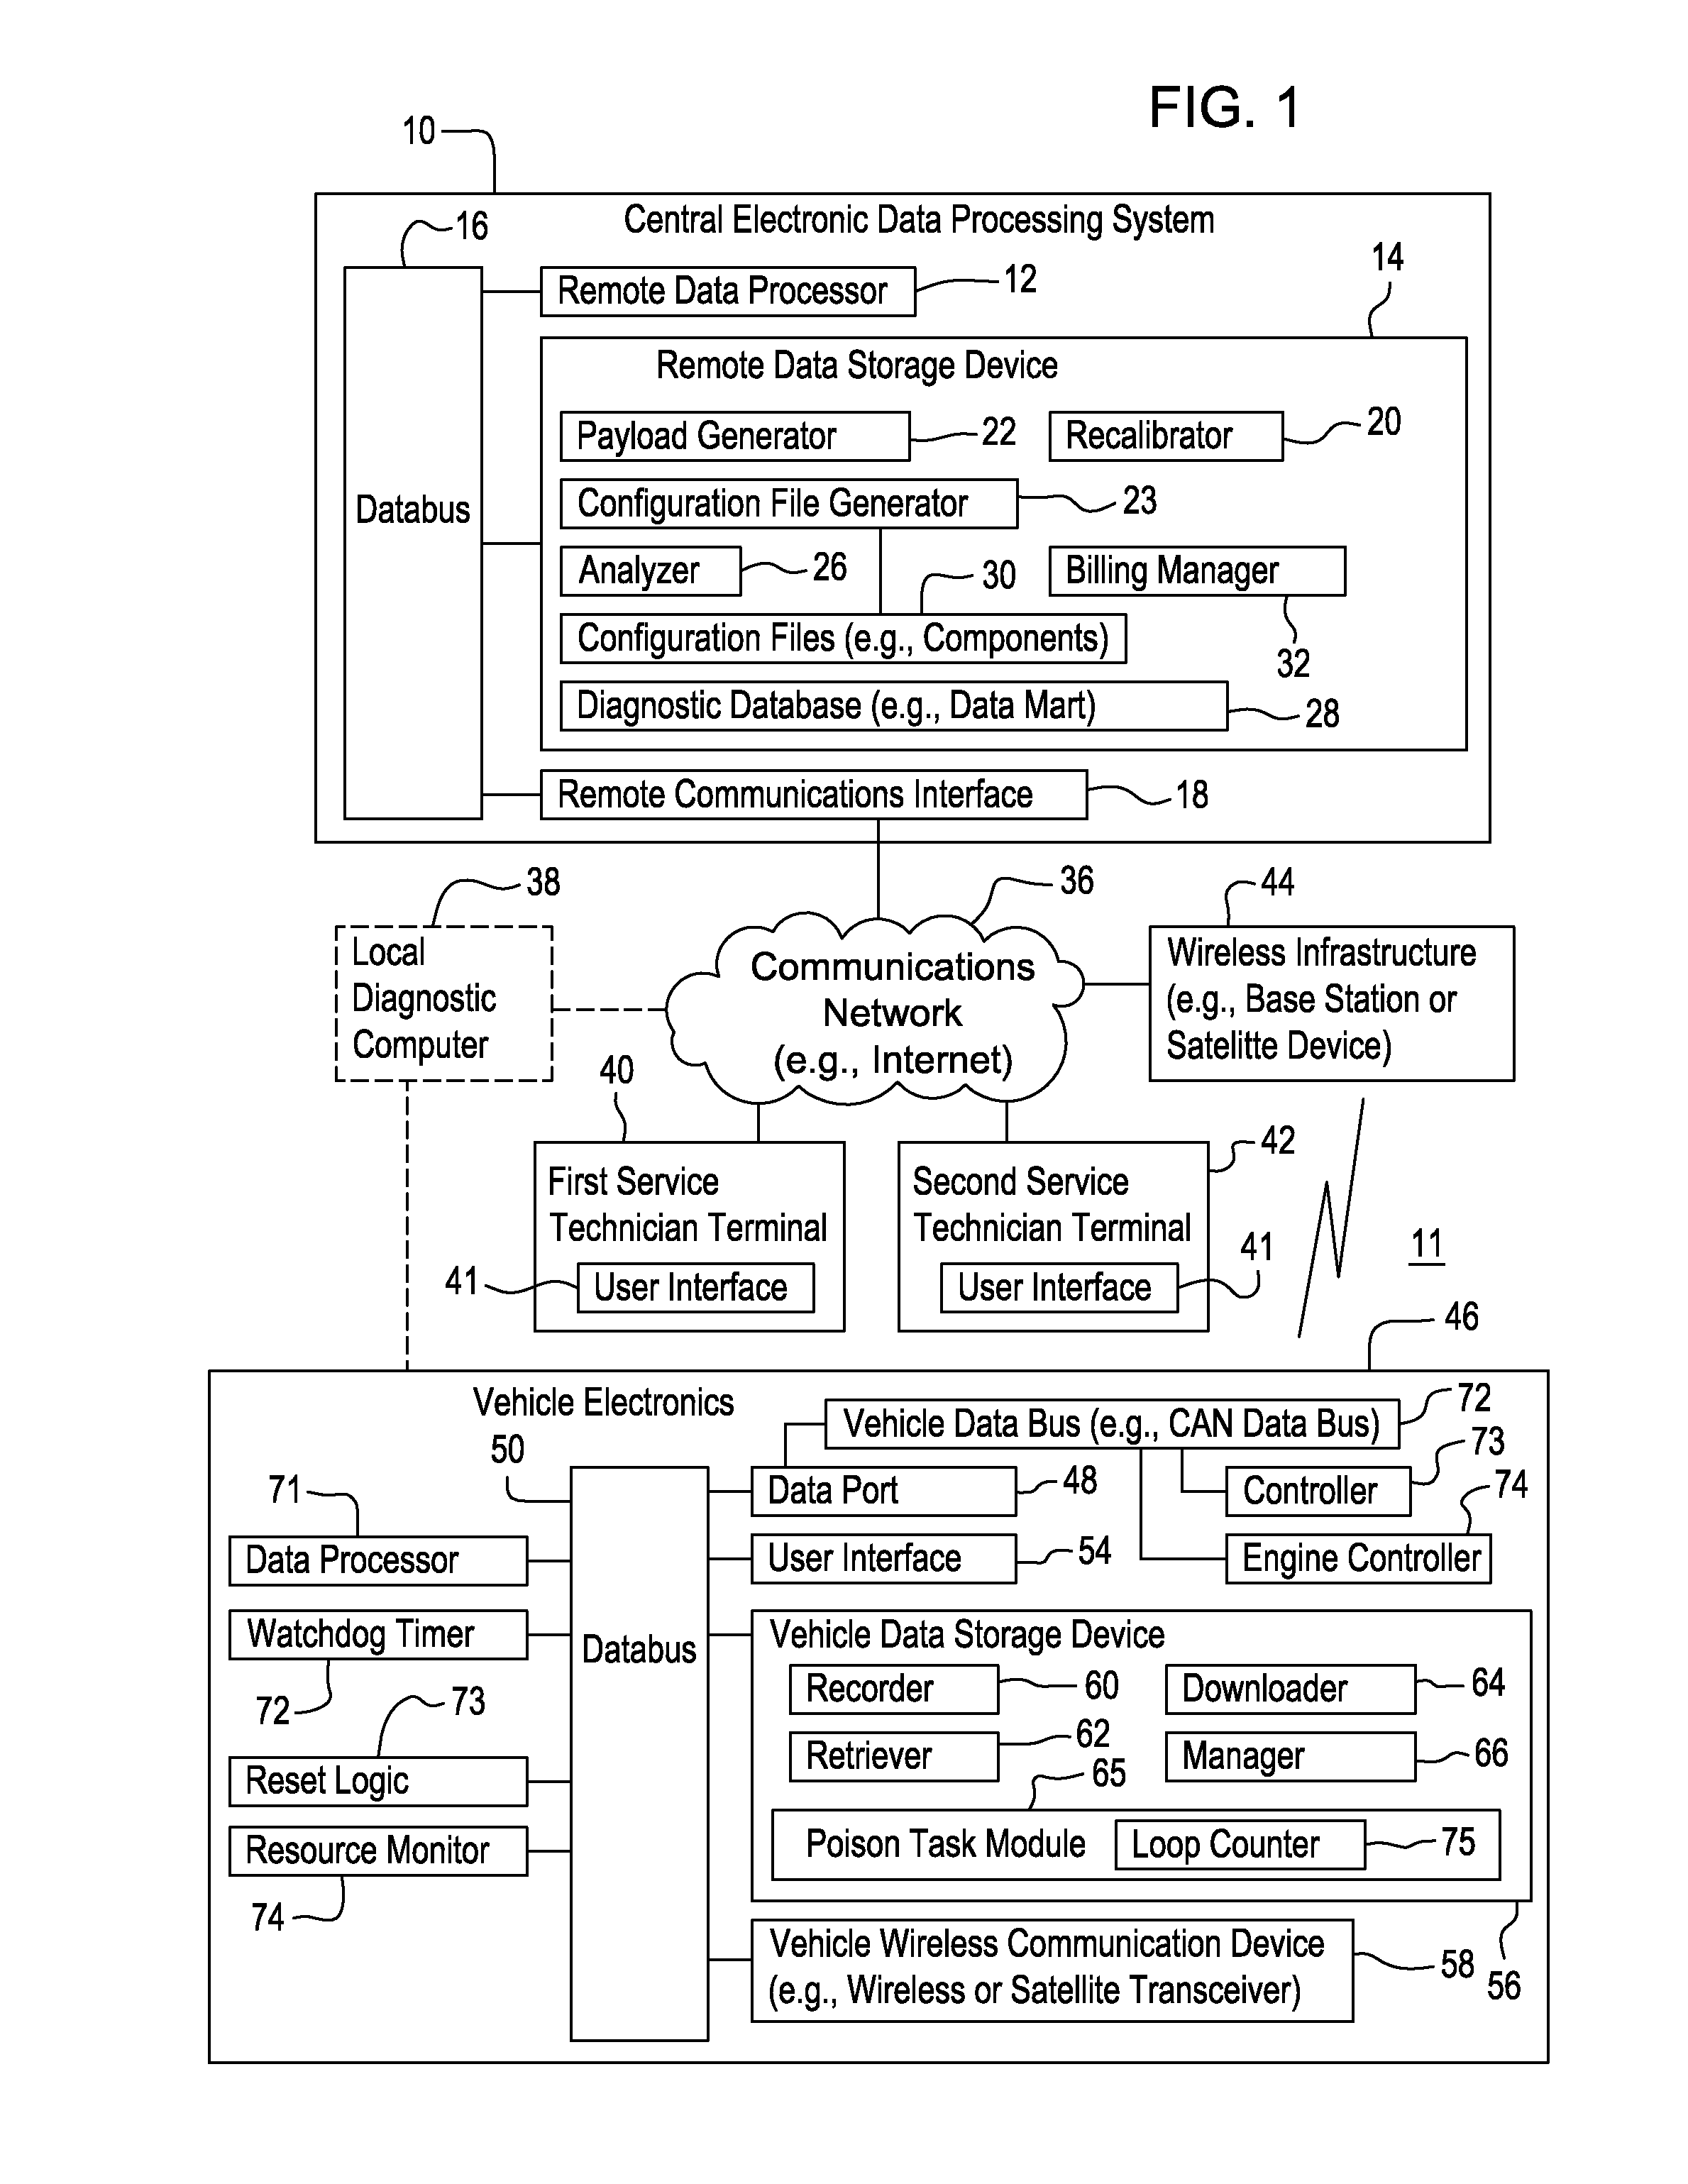 Method and system for performing diagnostics or software maintenance for a vehicle